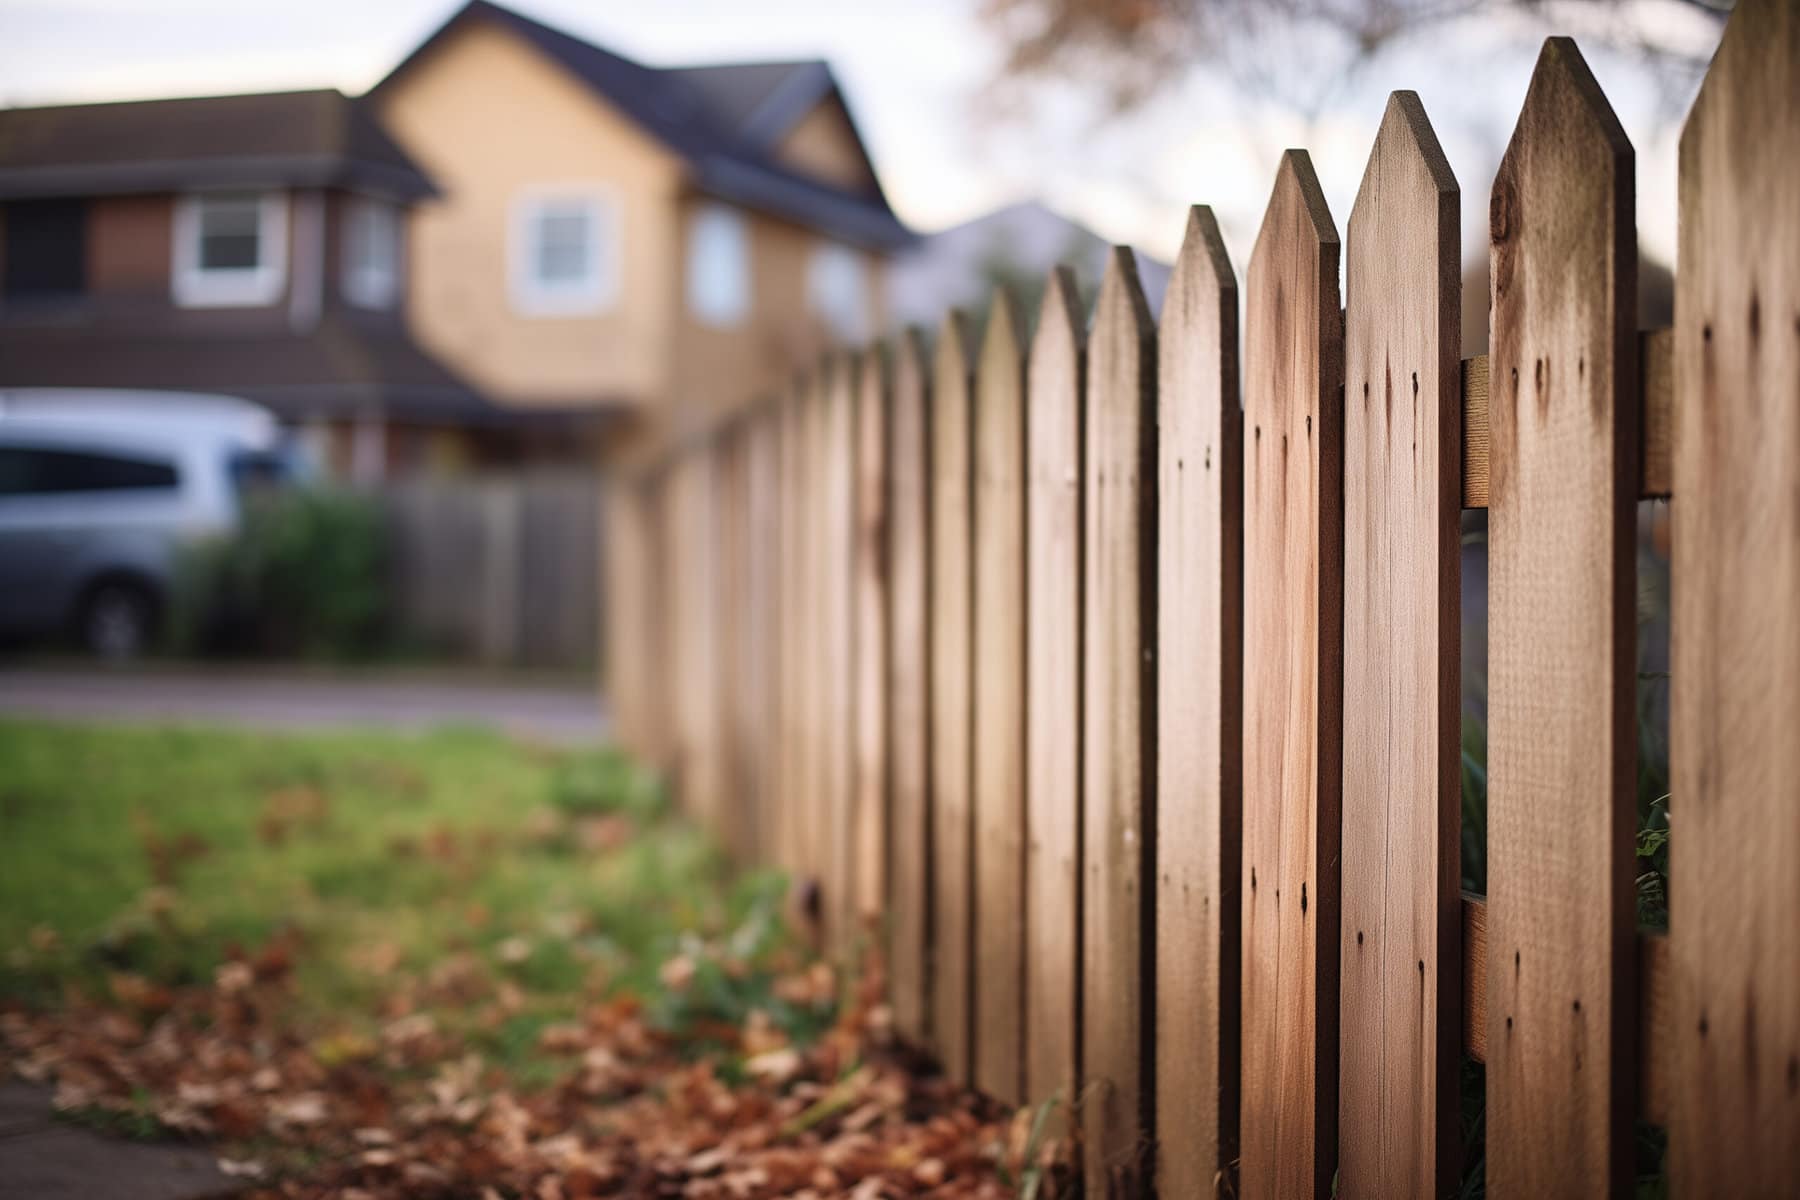 The Rome Fence Company Launches “Fence Safety Awareness” Campaign to Promote Safe Fencing Practices